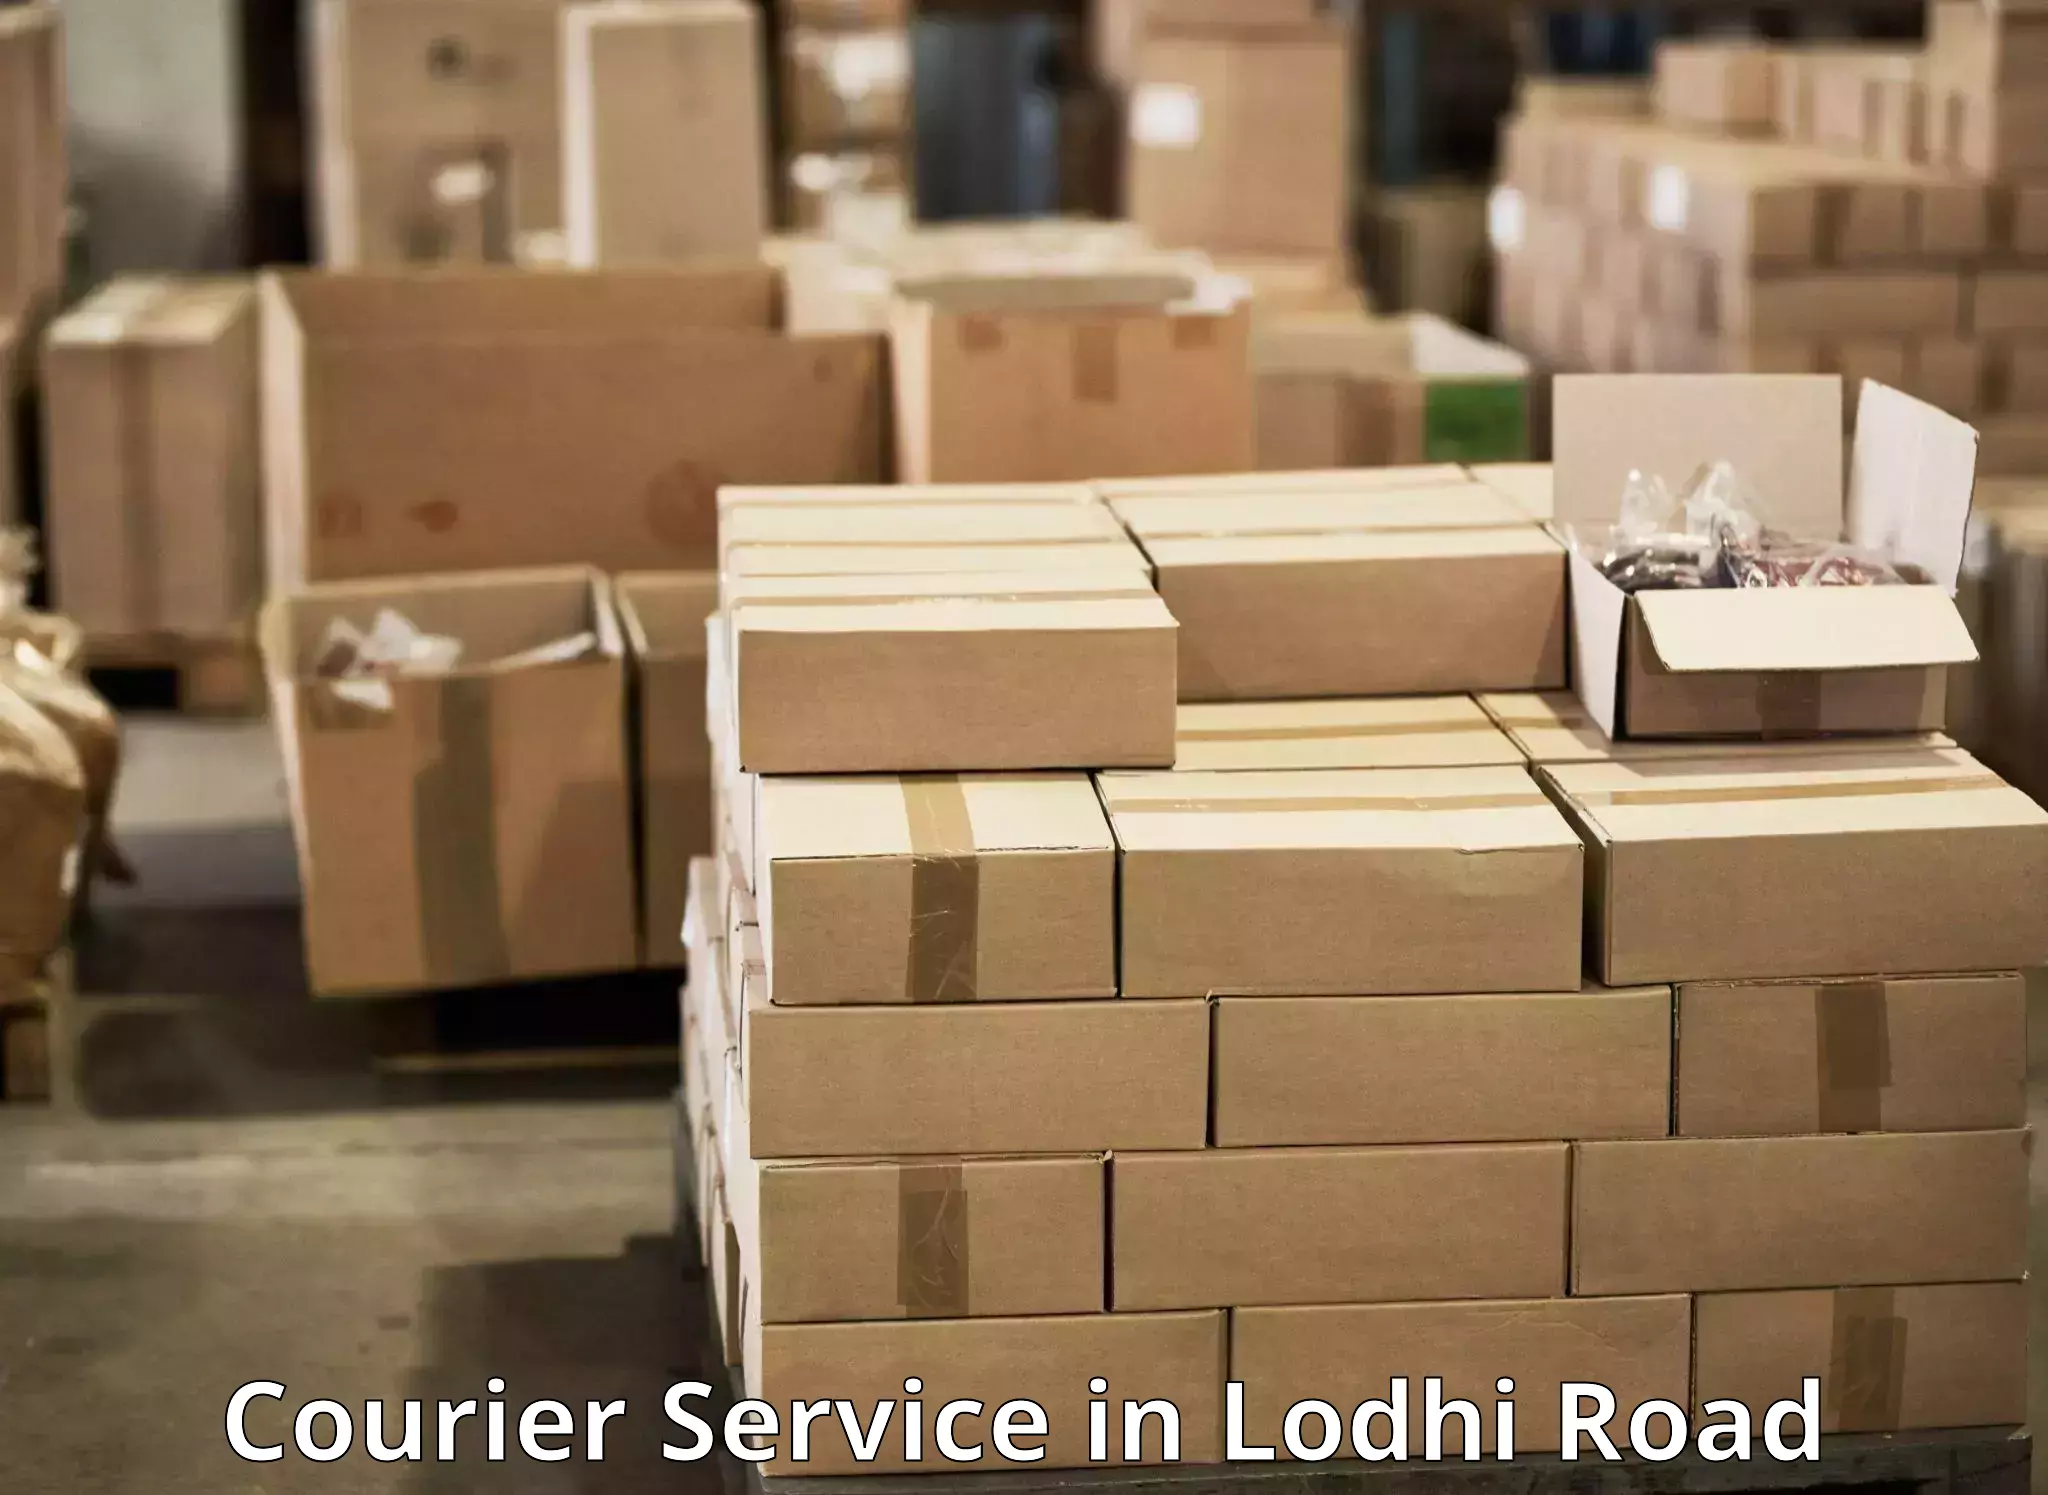 Express shipping in Lodhi Road